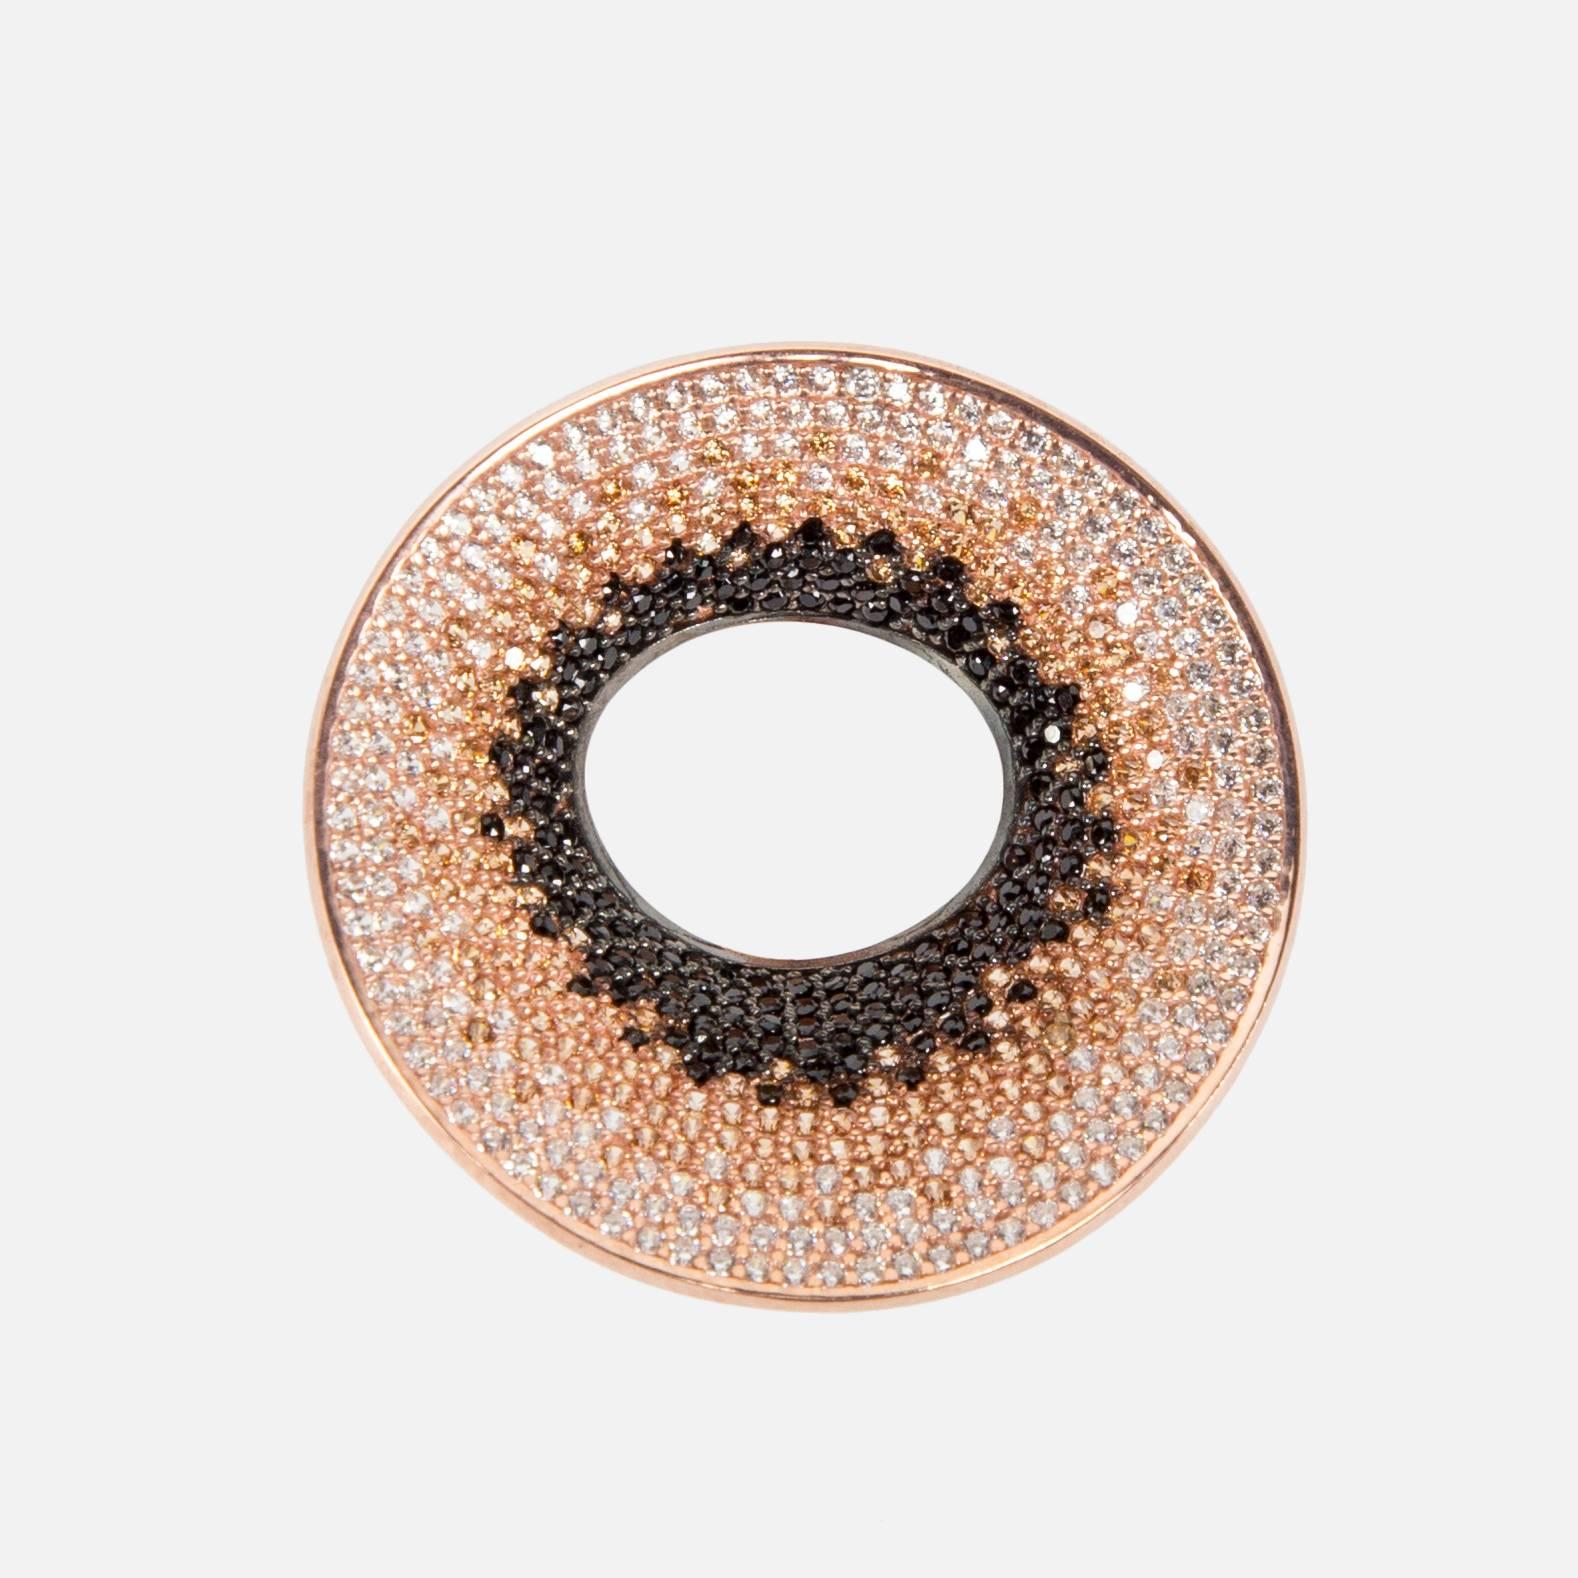 Outstanding Runway Crater Ring Glistening in pave set white, gold and black CZ Cubic Zirconium; beautifully crafted in Sterling Silver with Rose Gold finish. Marked: 925. For the fashionably fearless, providing a rare blend of elegance and edge! 

